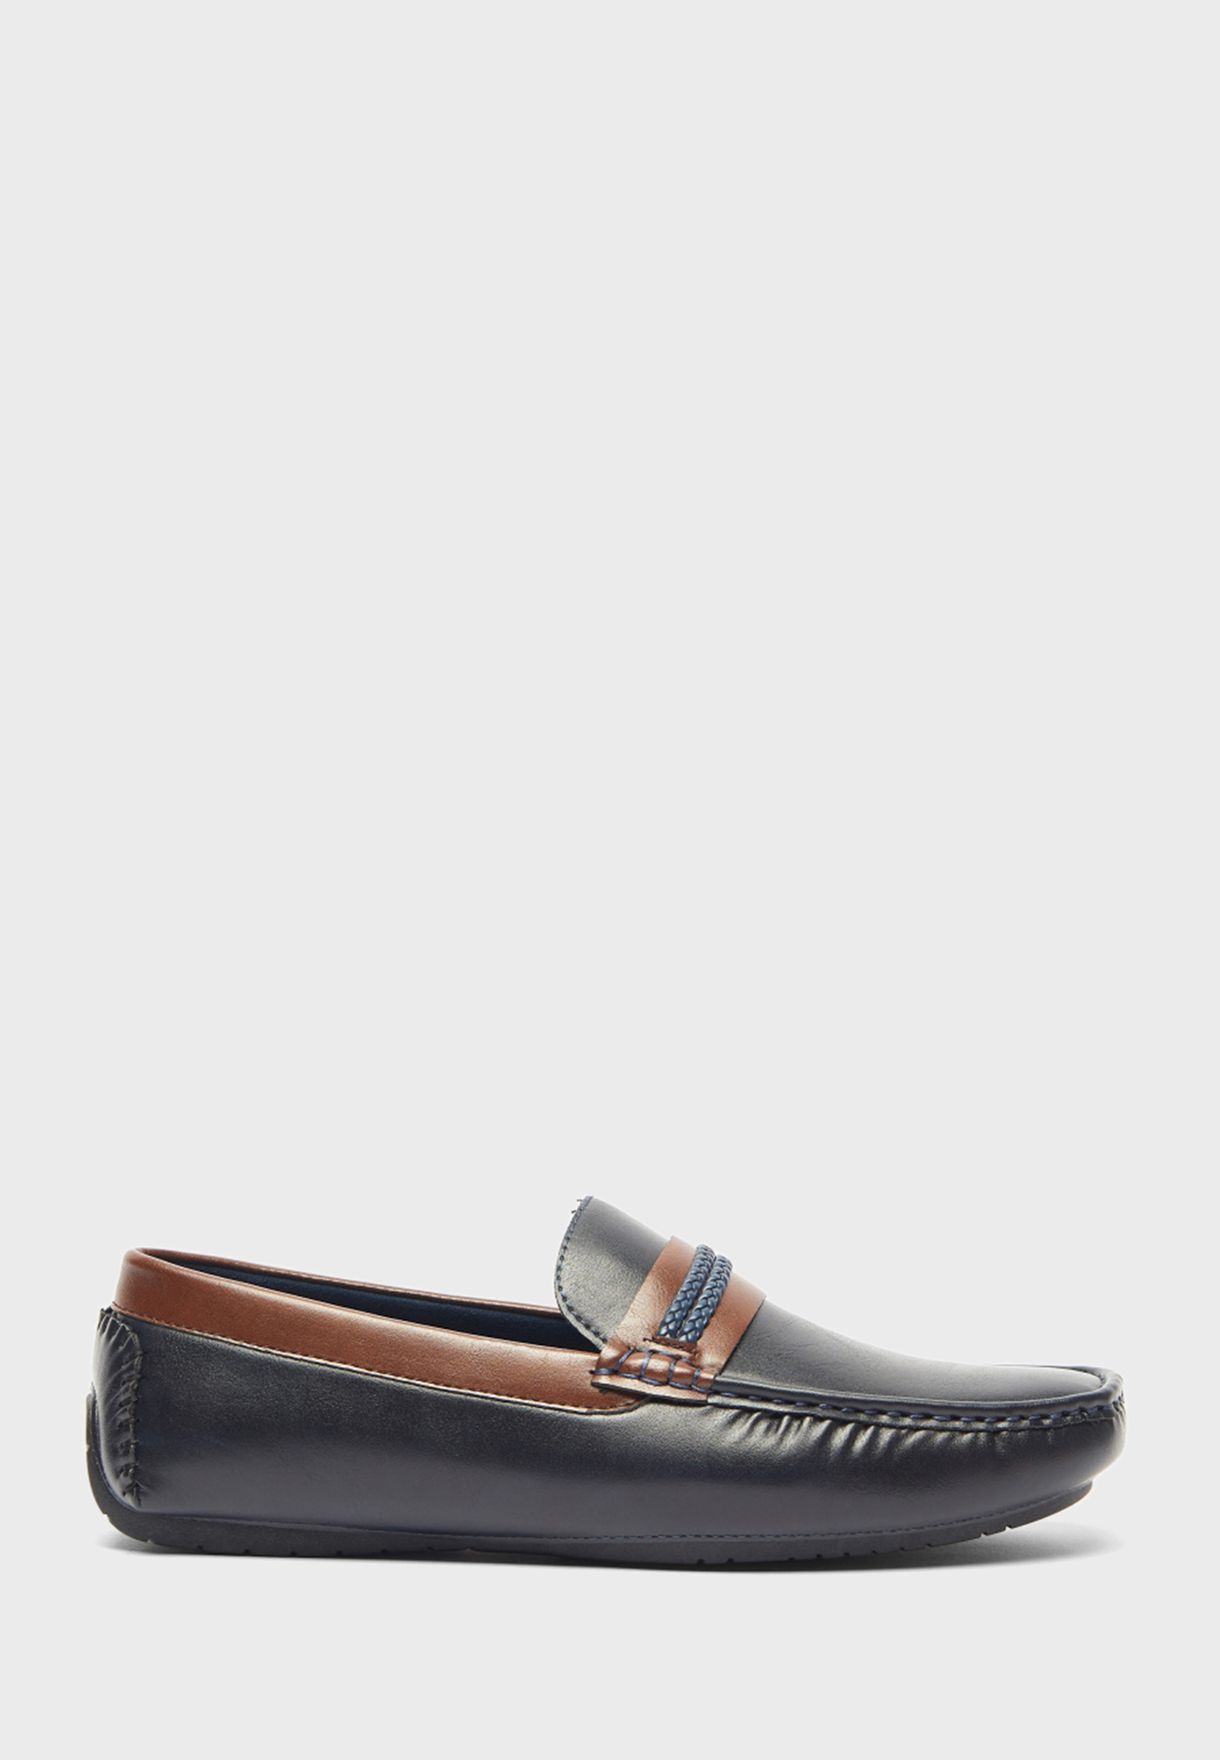 S222-Mcs-Ss-02 Slip On Loafers